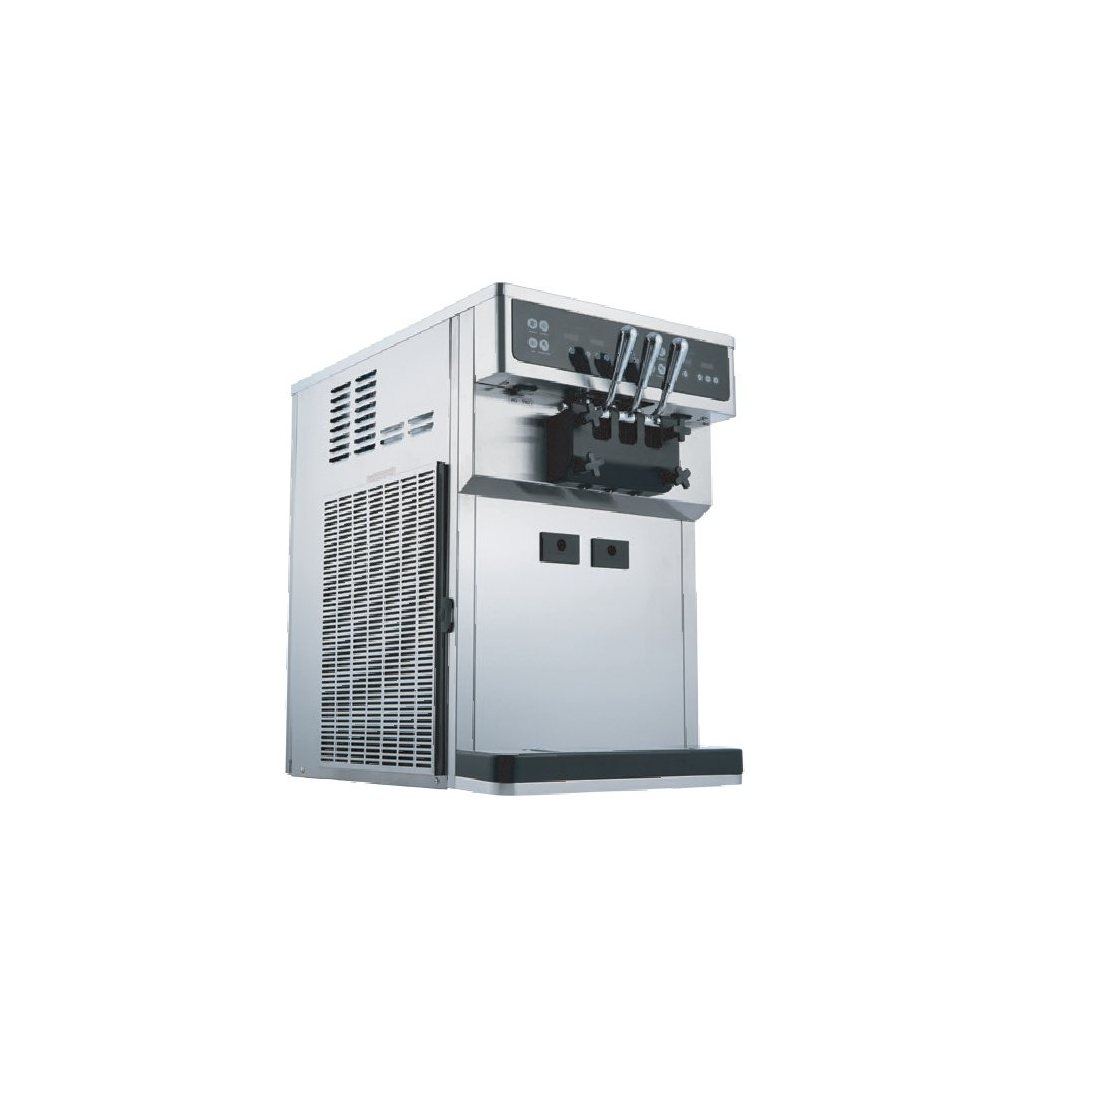 Icetro ,SSI-163TB, Ice Cream Machine Table top 2 Flavors with twist 11L|mkayn|مكاين